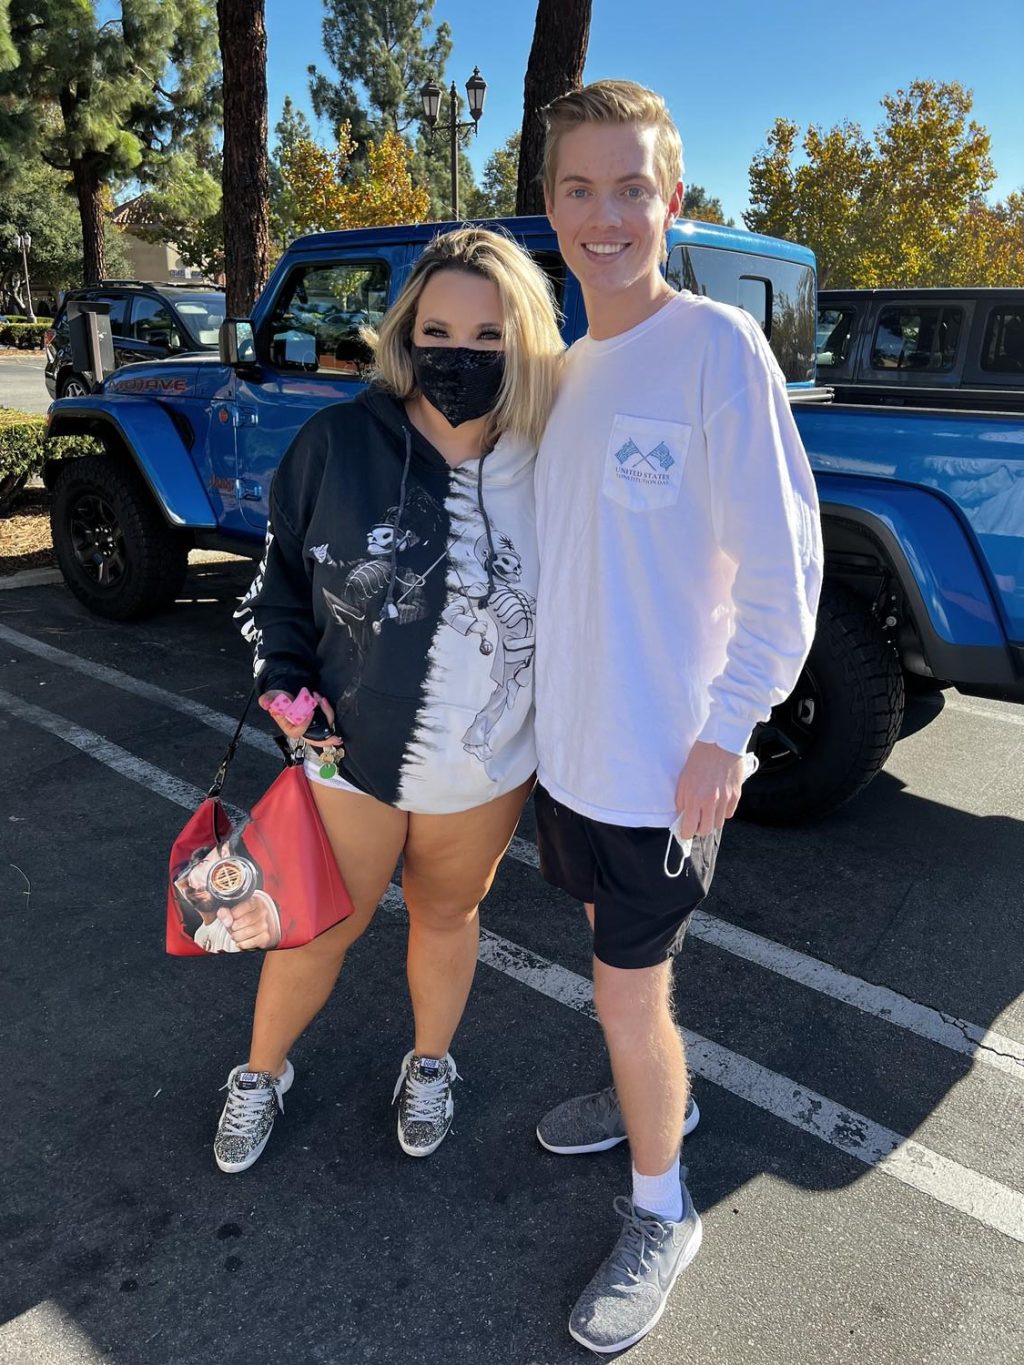 Zieg smiles with Trisha Paytas on Nov. 3, in the Trader Joe's parking lot. Zieg said he is an active participant in ducking. Photo courtesy of Liam Zieg